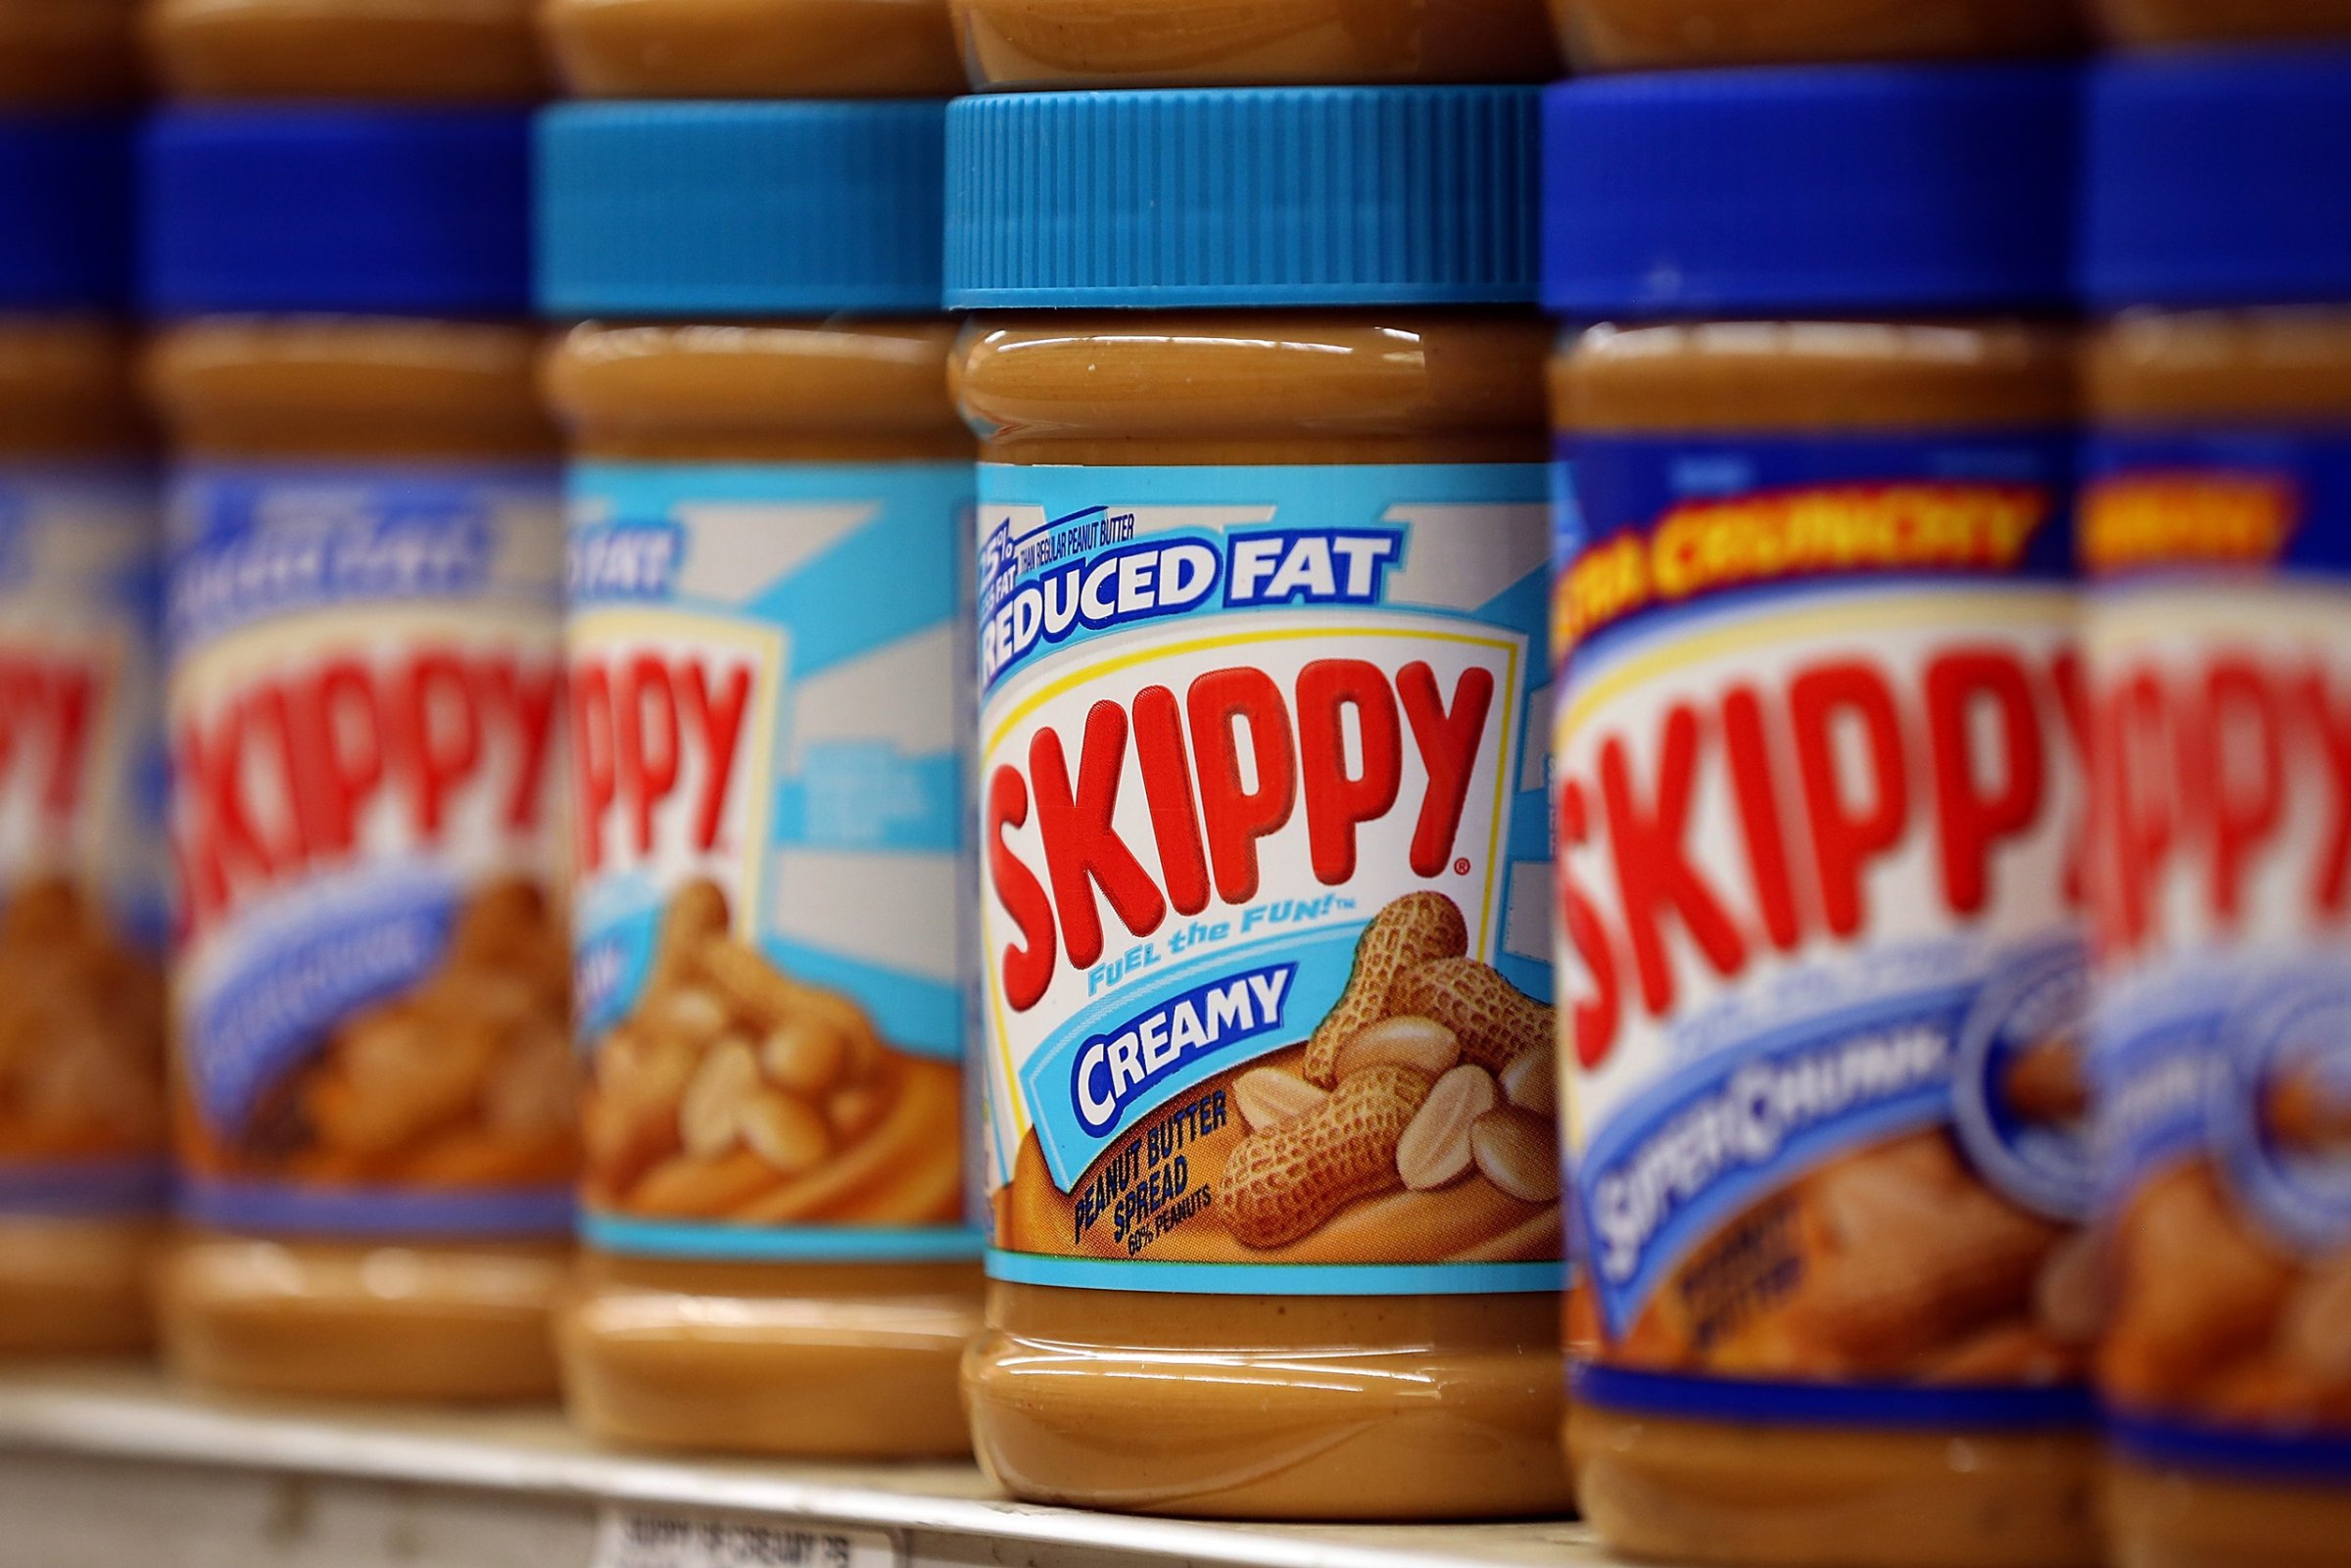 SAN FRANCISCO, CA - JANUARY 03: Jars of Skippy peanut butter are displayed on a shelf at Cal Mart grocery store on January 3, 2013 in San Francisco, California. Hormel, the maker of Spam, announced that it will purchase the Skippy peanut butter brand from Unilever for $700 million in cash. (Photo by Justin Sullivan/Getty Images)